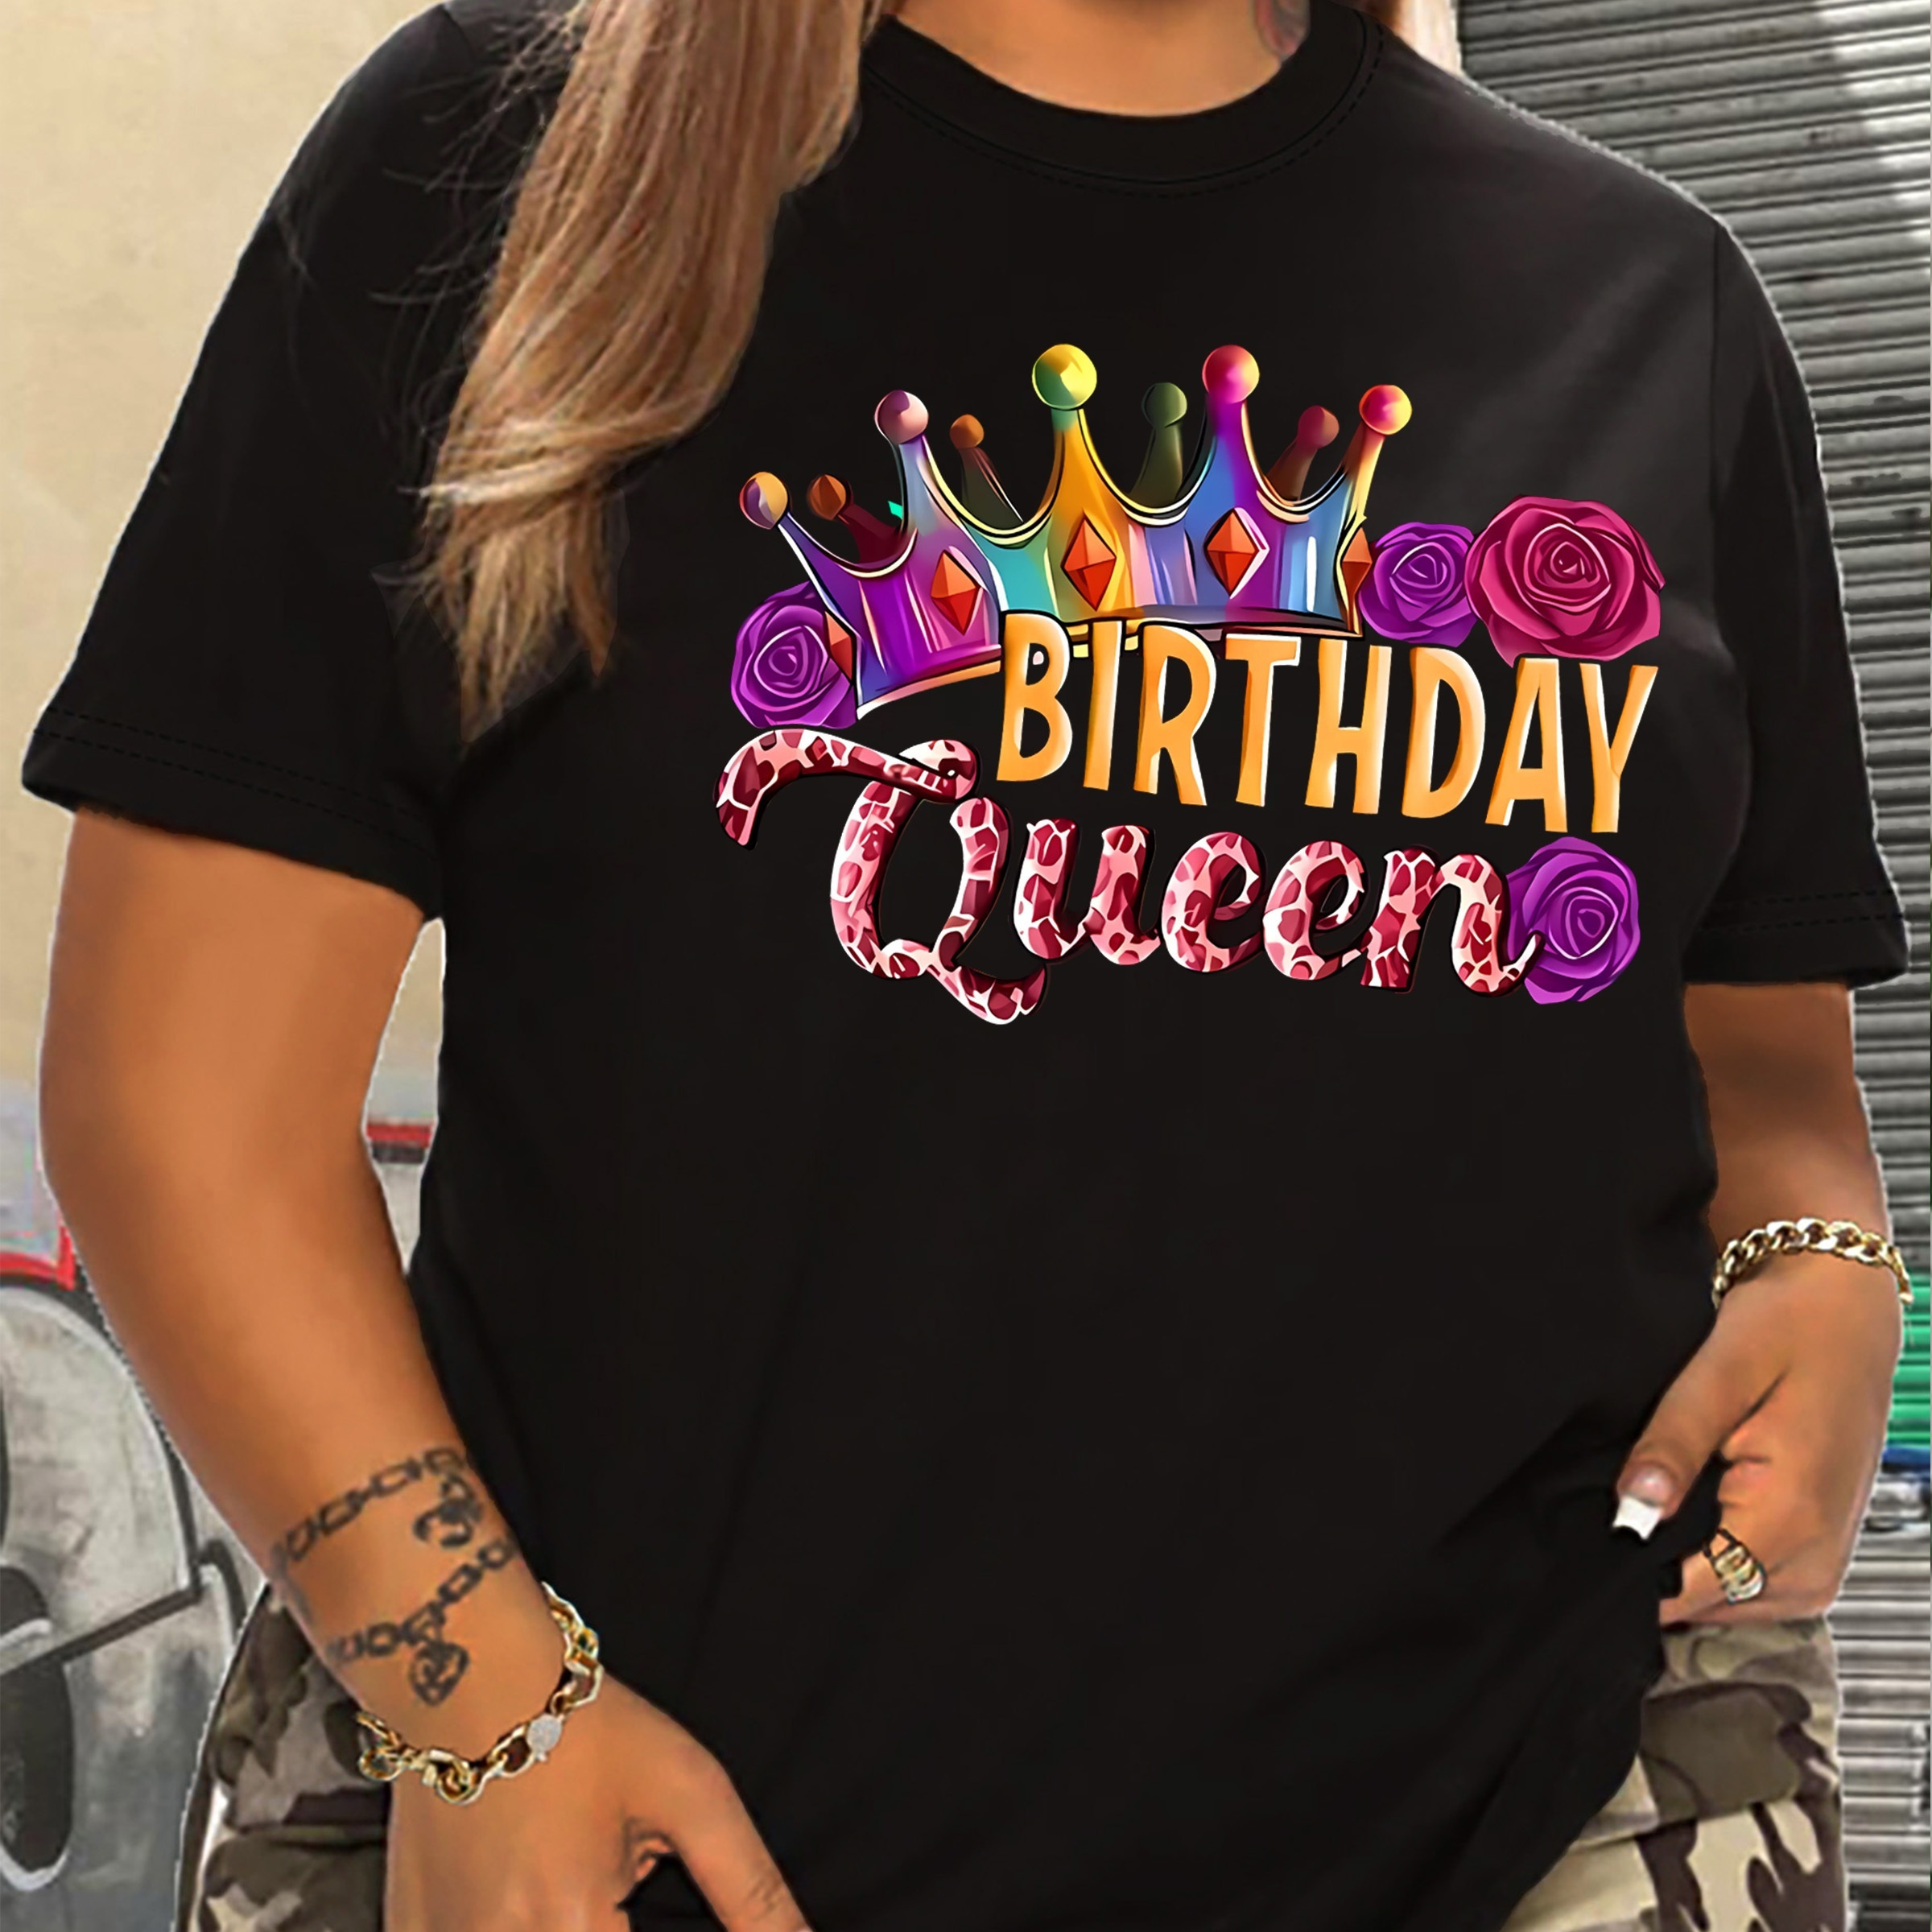 

Women's Plus Size Casual Sporty T-shirt With Colorful Crown & Roses Print, Fashion Birthday Queen Graphic Tee, Short Sleeve Gift Top For Ladies - Relaxed Fit